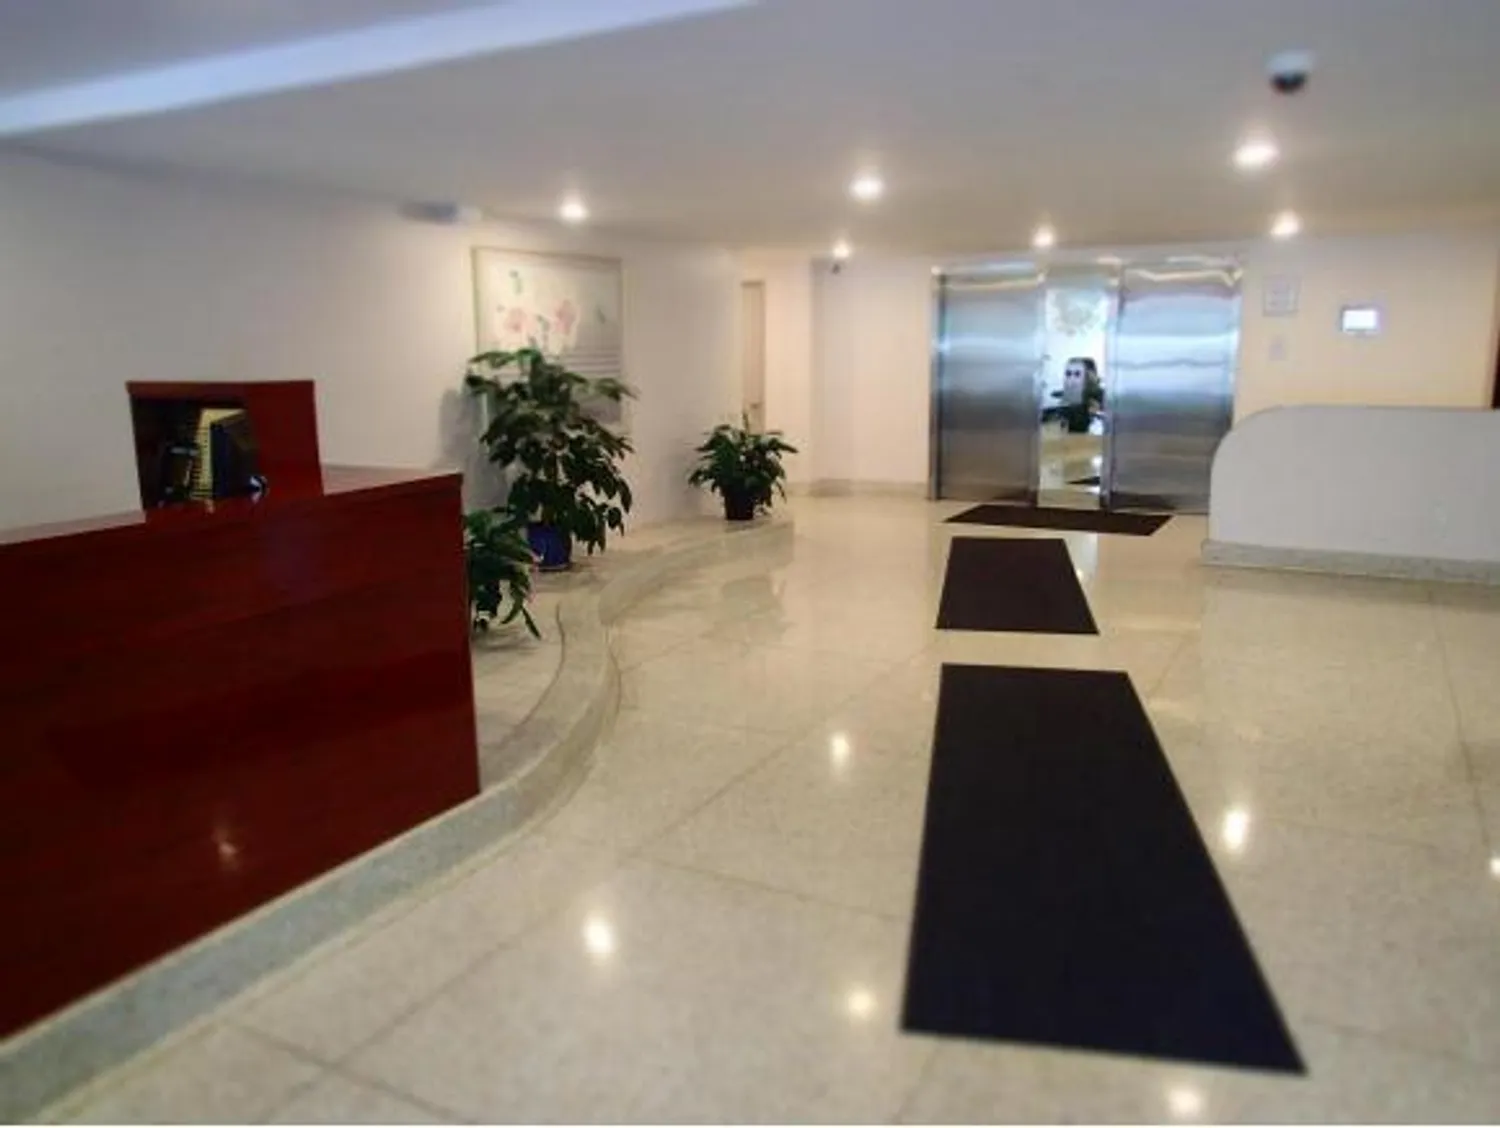 Well-maintained lobby with doorman and elevator!